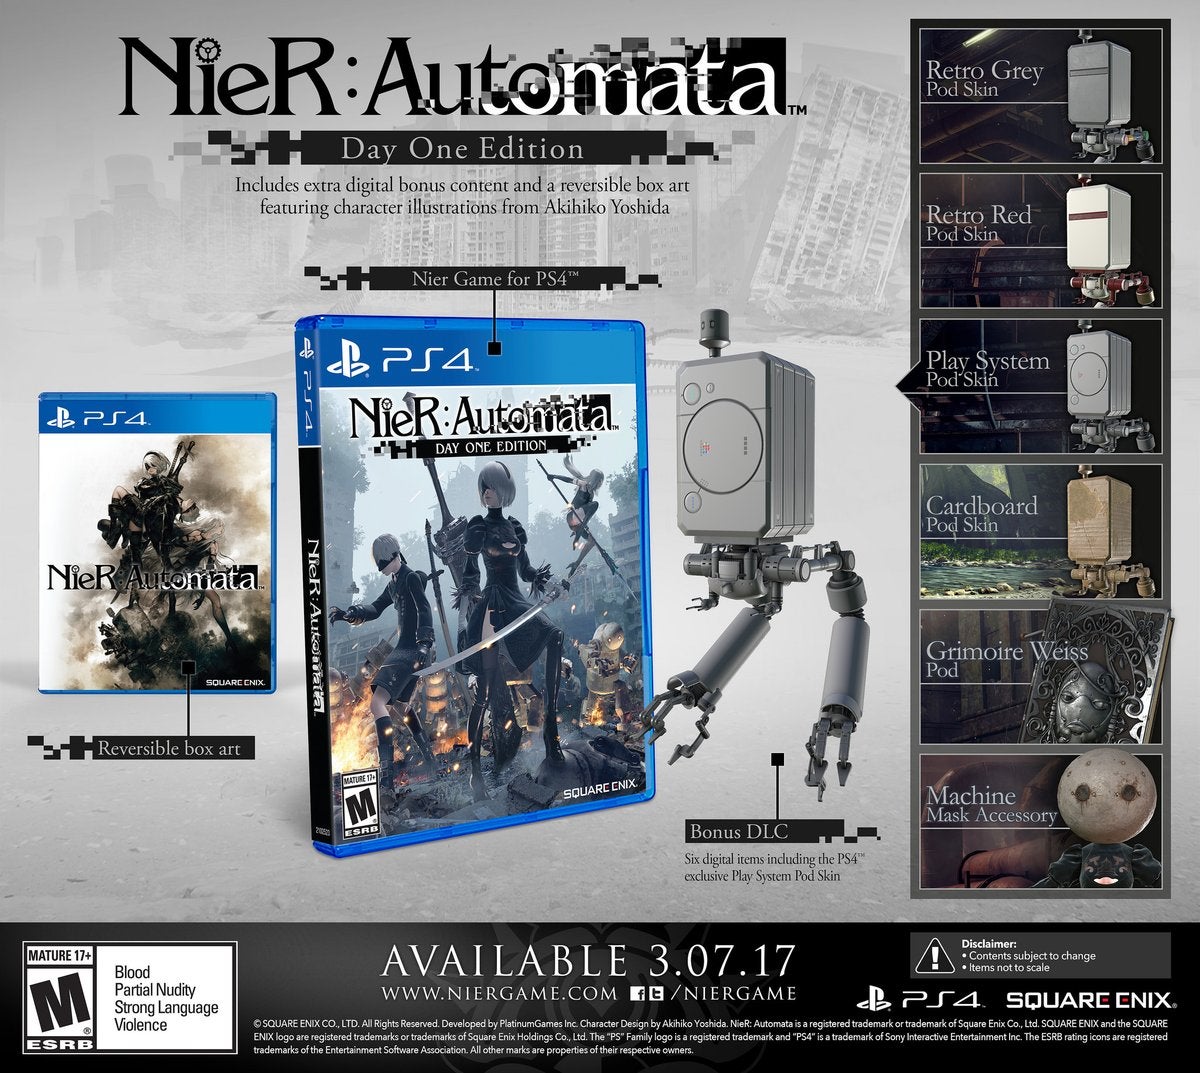 NieR: Automata's 2017 release date confirmed at PSX. Day One and